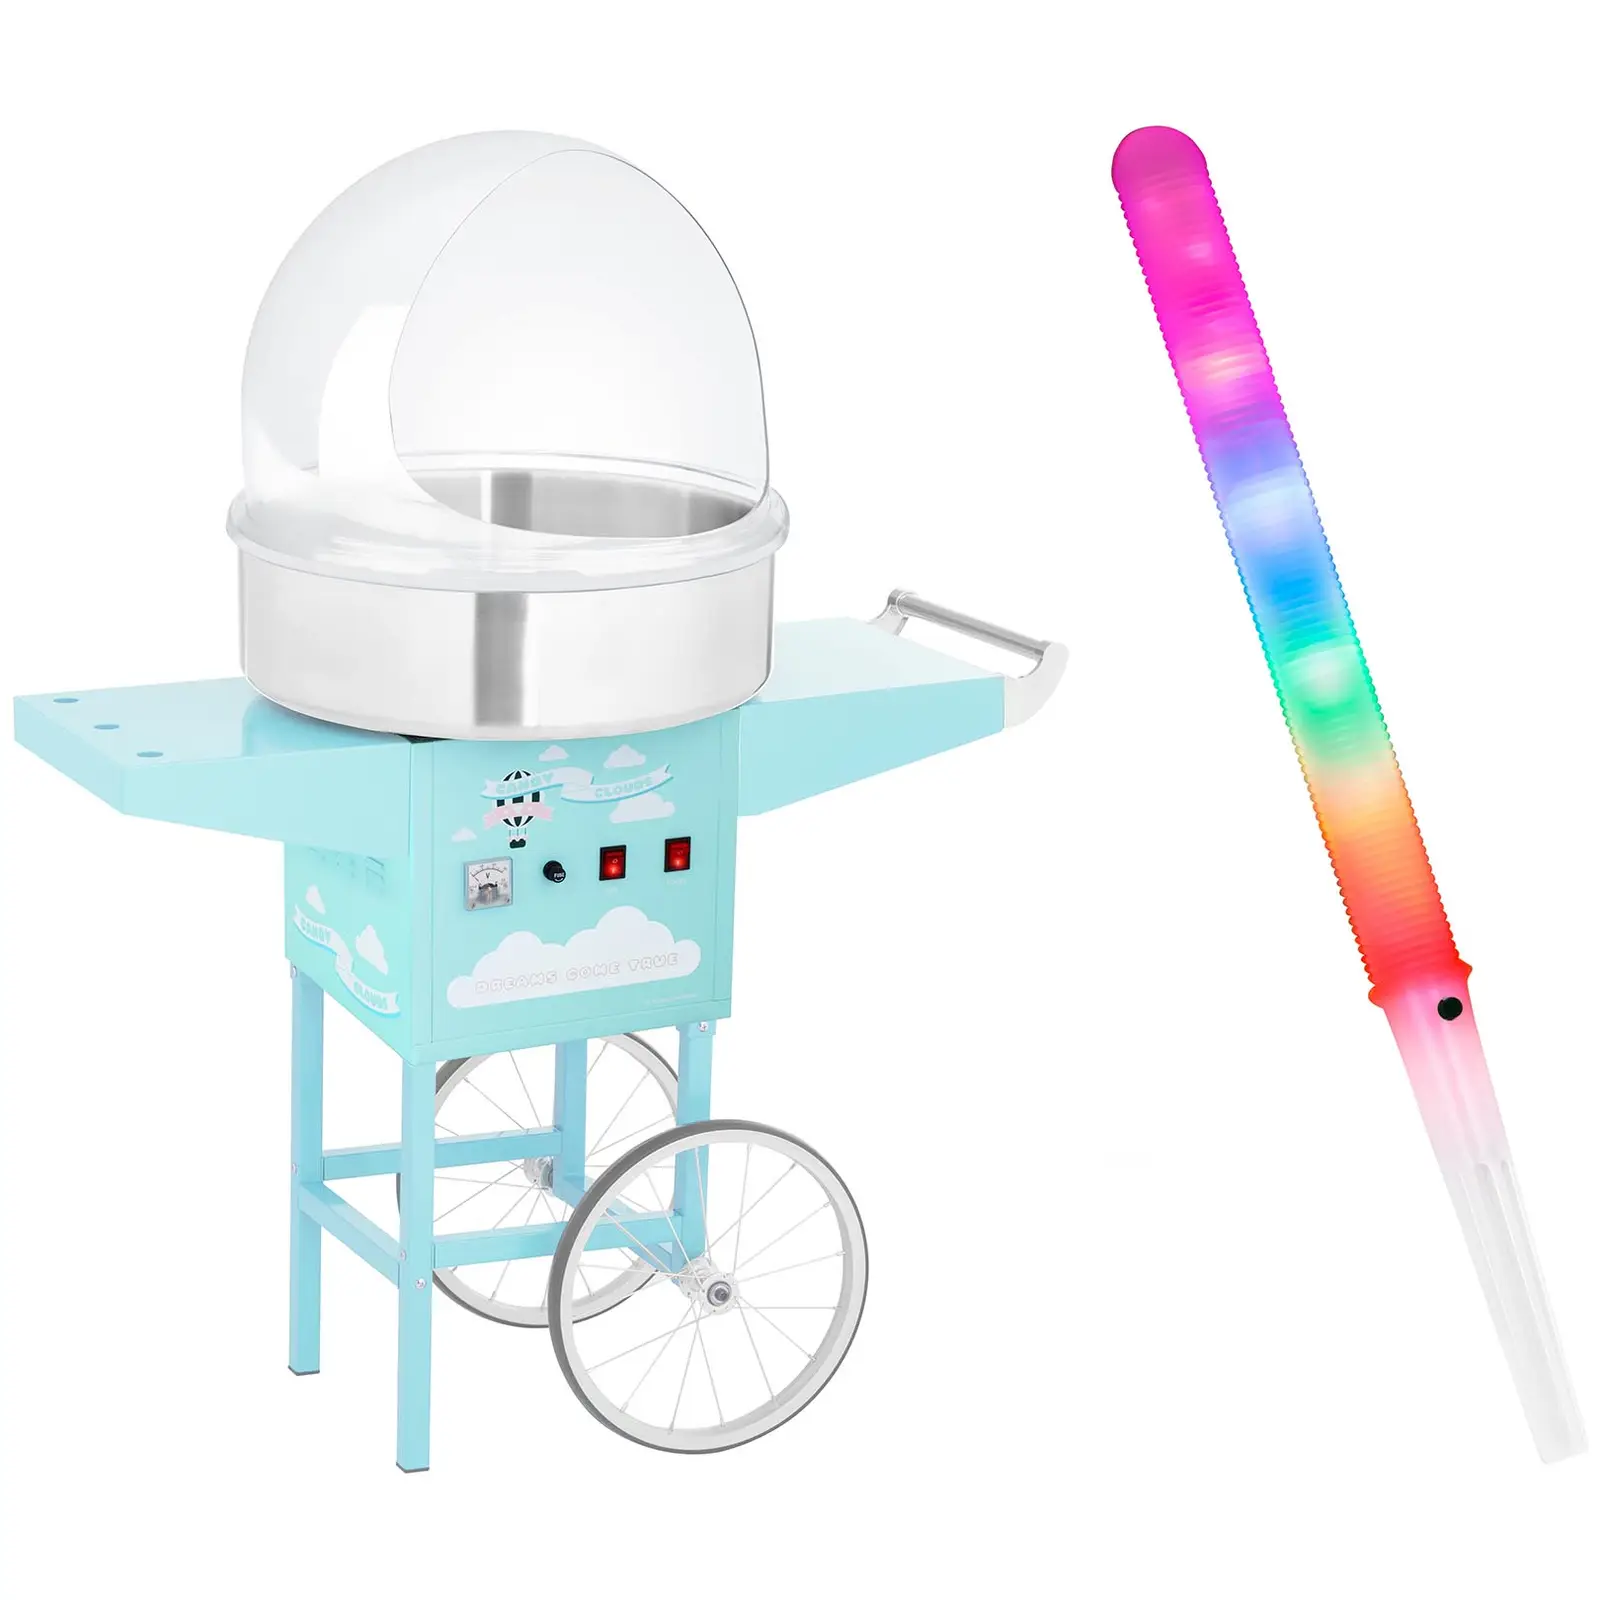 Candy Floss Machine Set with LED Cotton Candy Sticks - sneeze guard - cart - 52 cm - 1,200 watts - turquoise